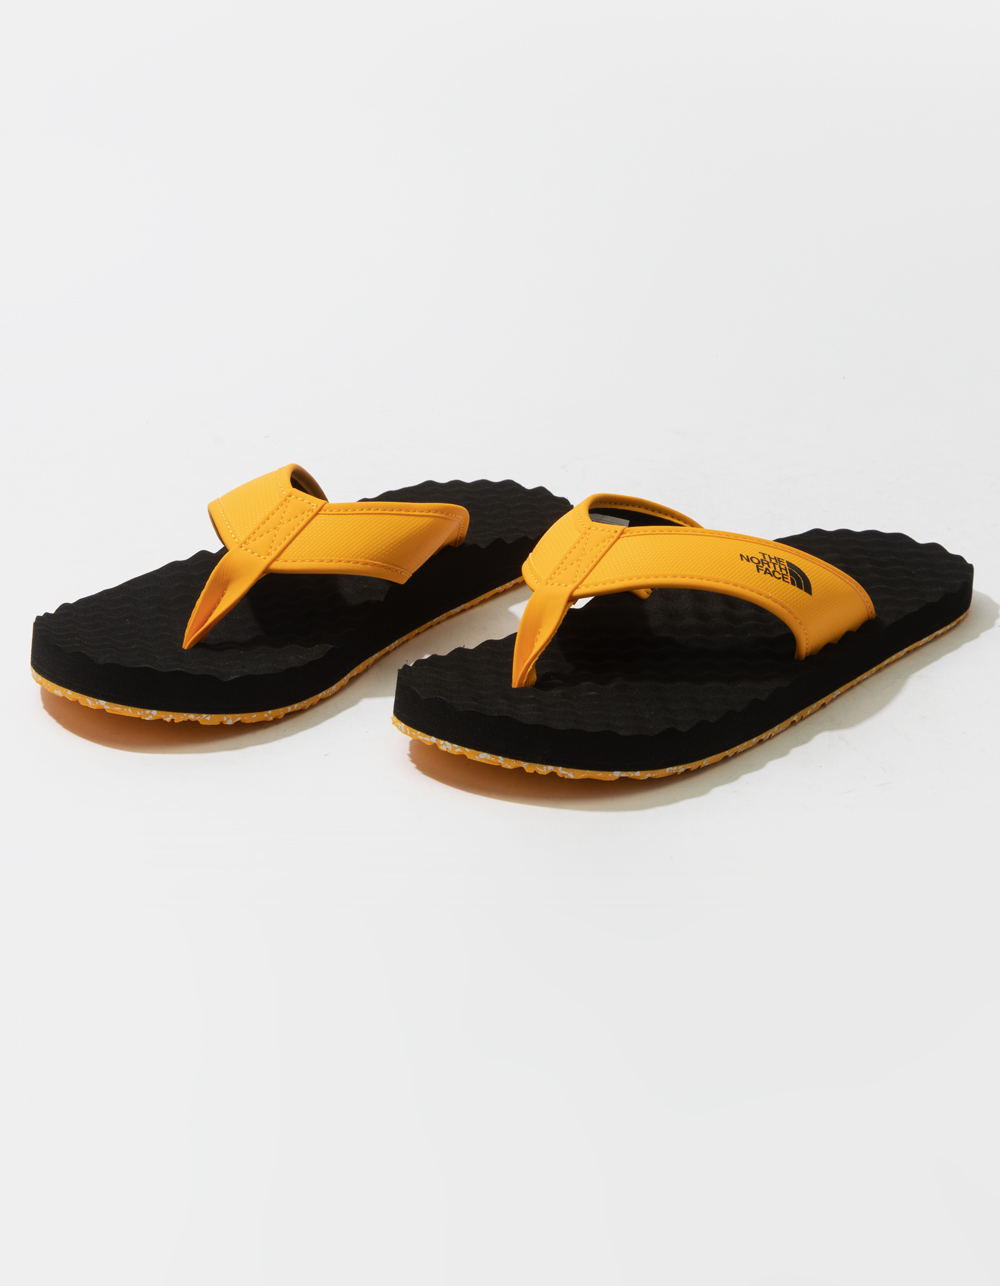 THE NORTH FACE Base Camp II Mens Flip Flop Sandals - BLK/YELLOW | Tillys